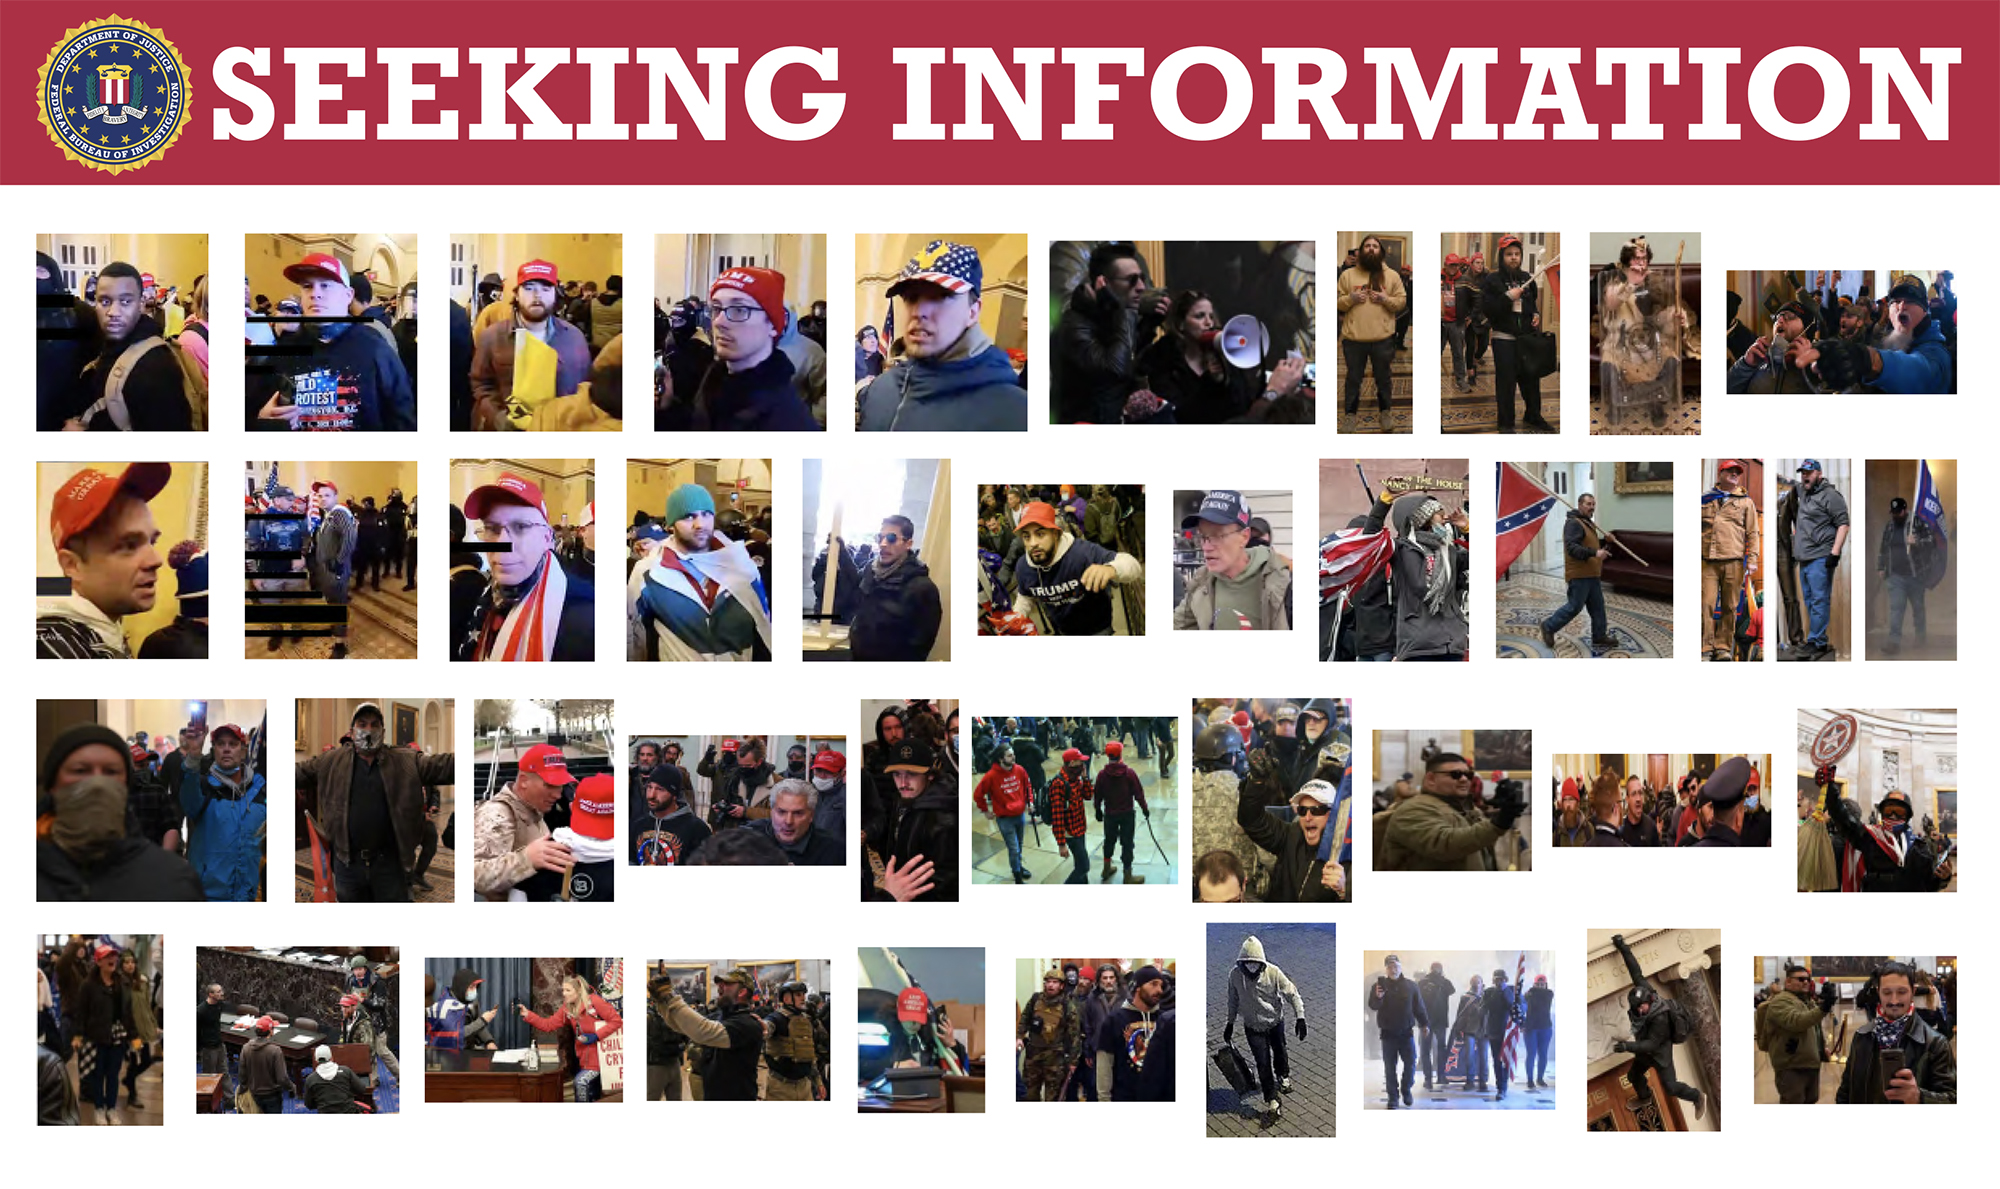 Collage of persons who committed violence at the U.S. Capitol on January 6, 2021. The FBI is seeking information on these people and others, many of which can be viewed at FBI.gov/capitolviolence.